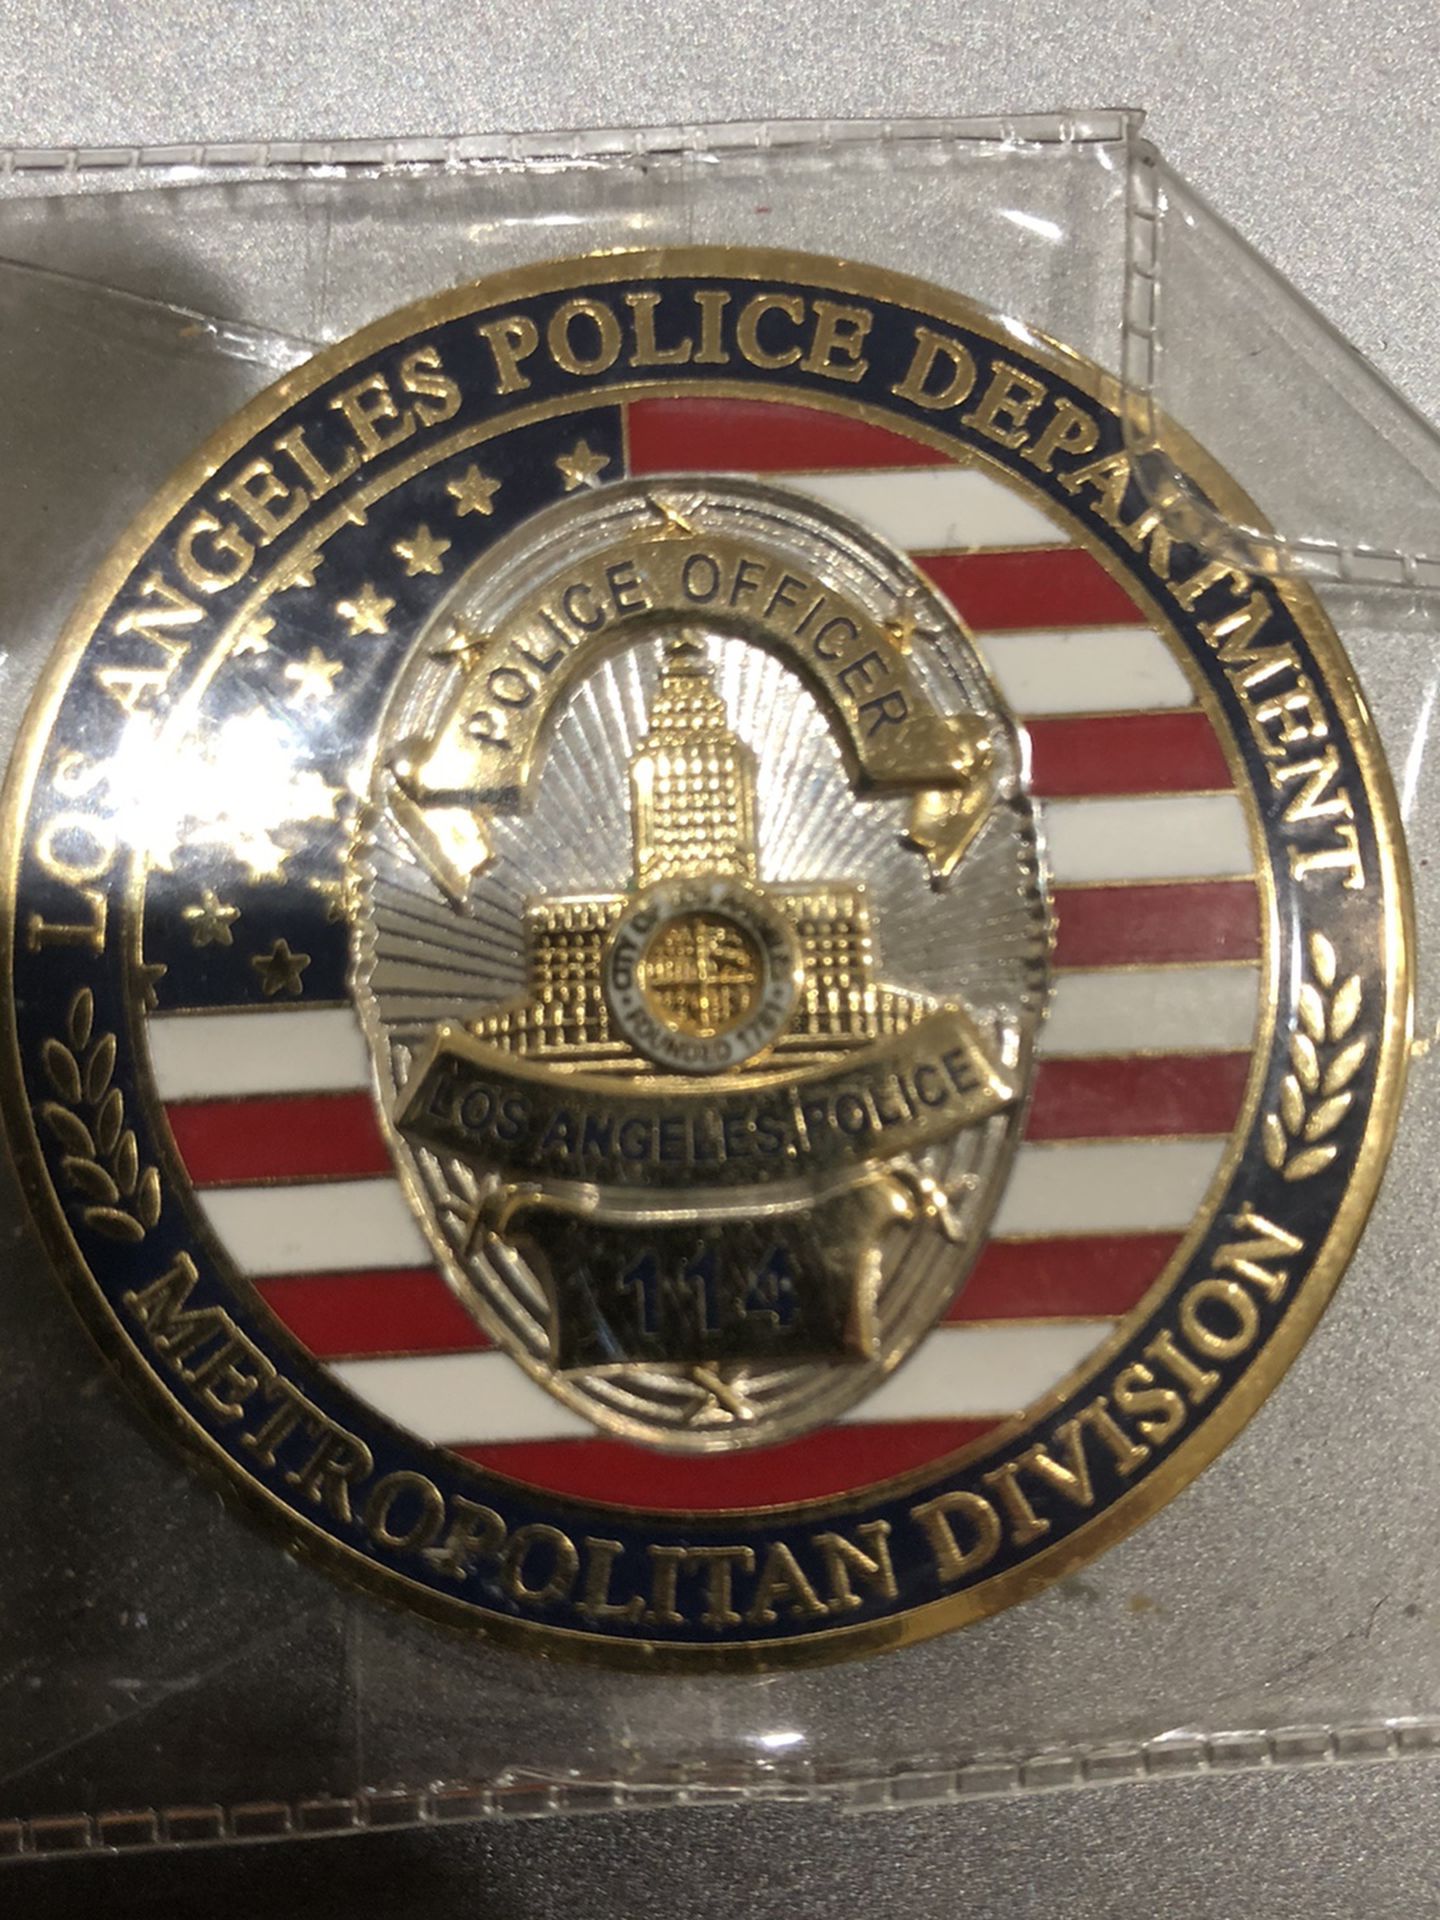 Los Angeles police department Metropolitanu division Coin